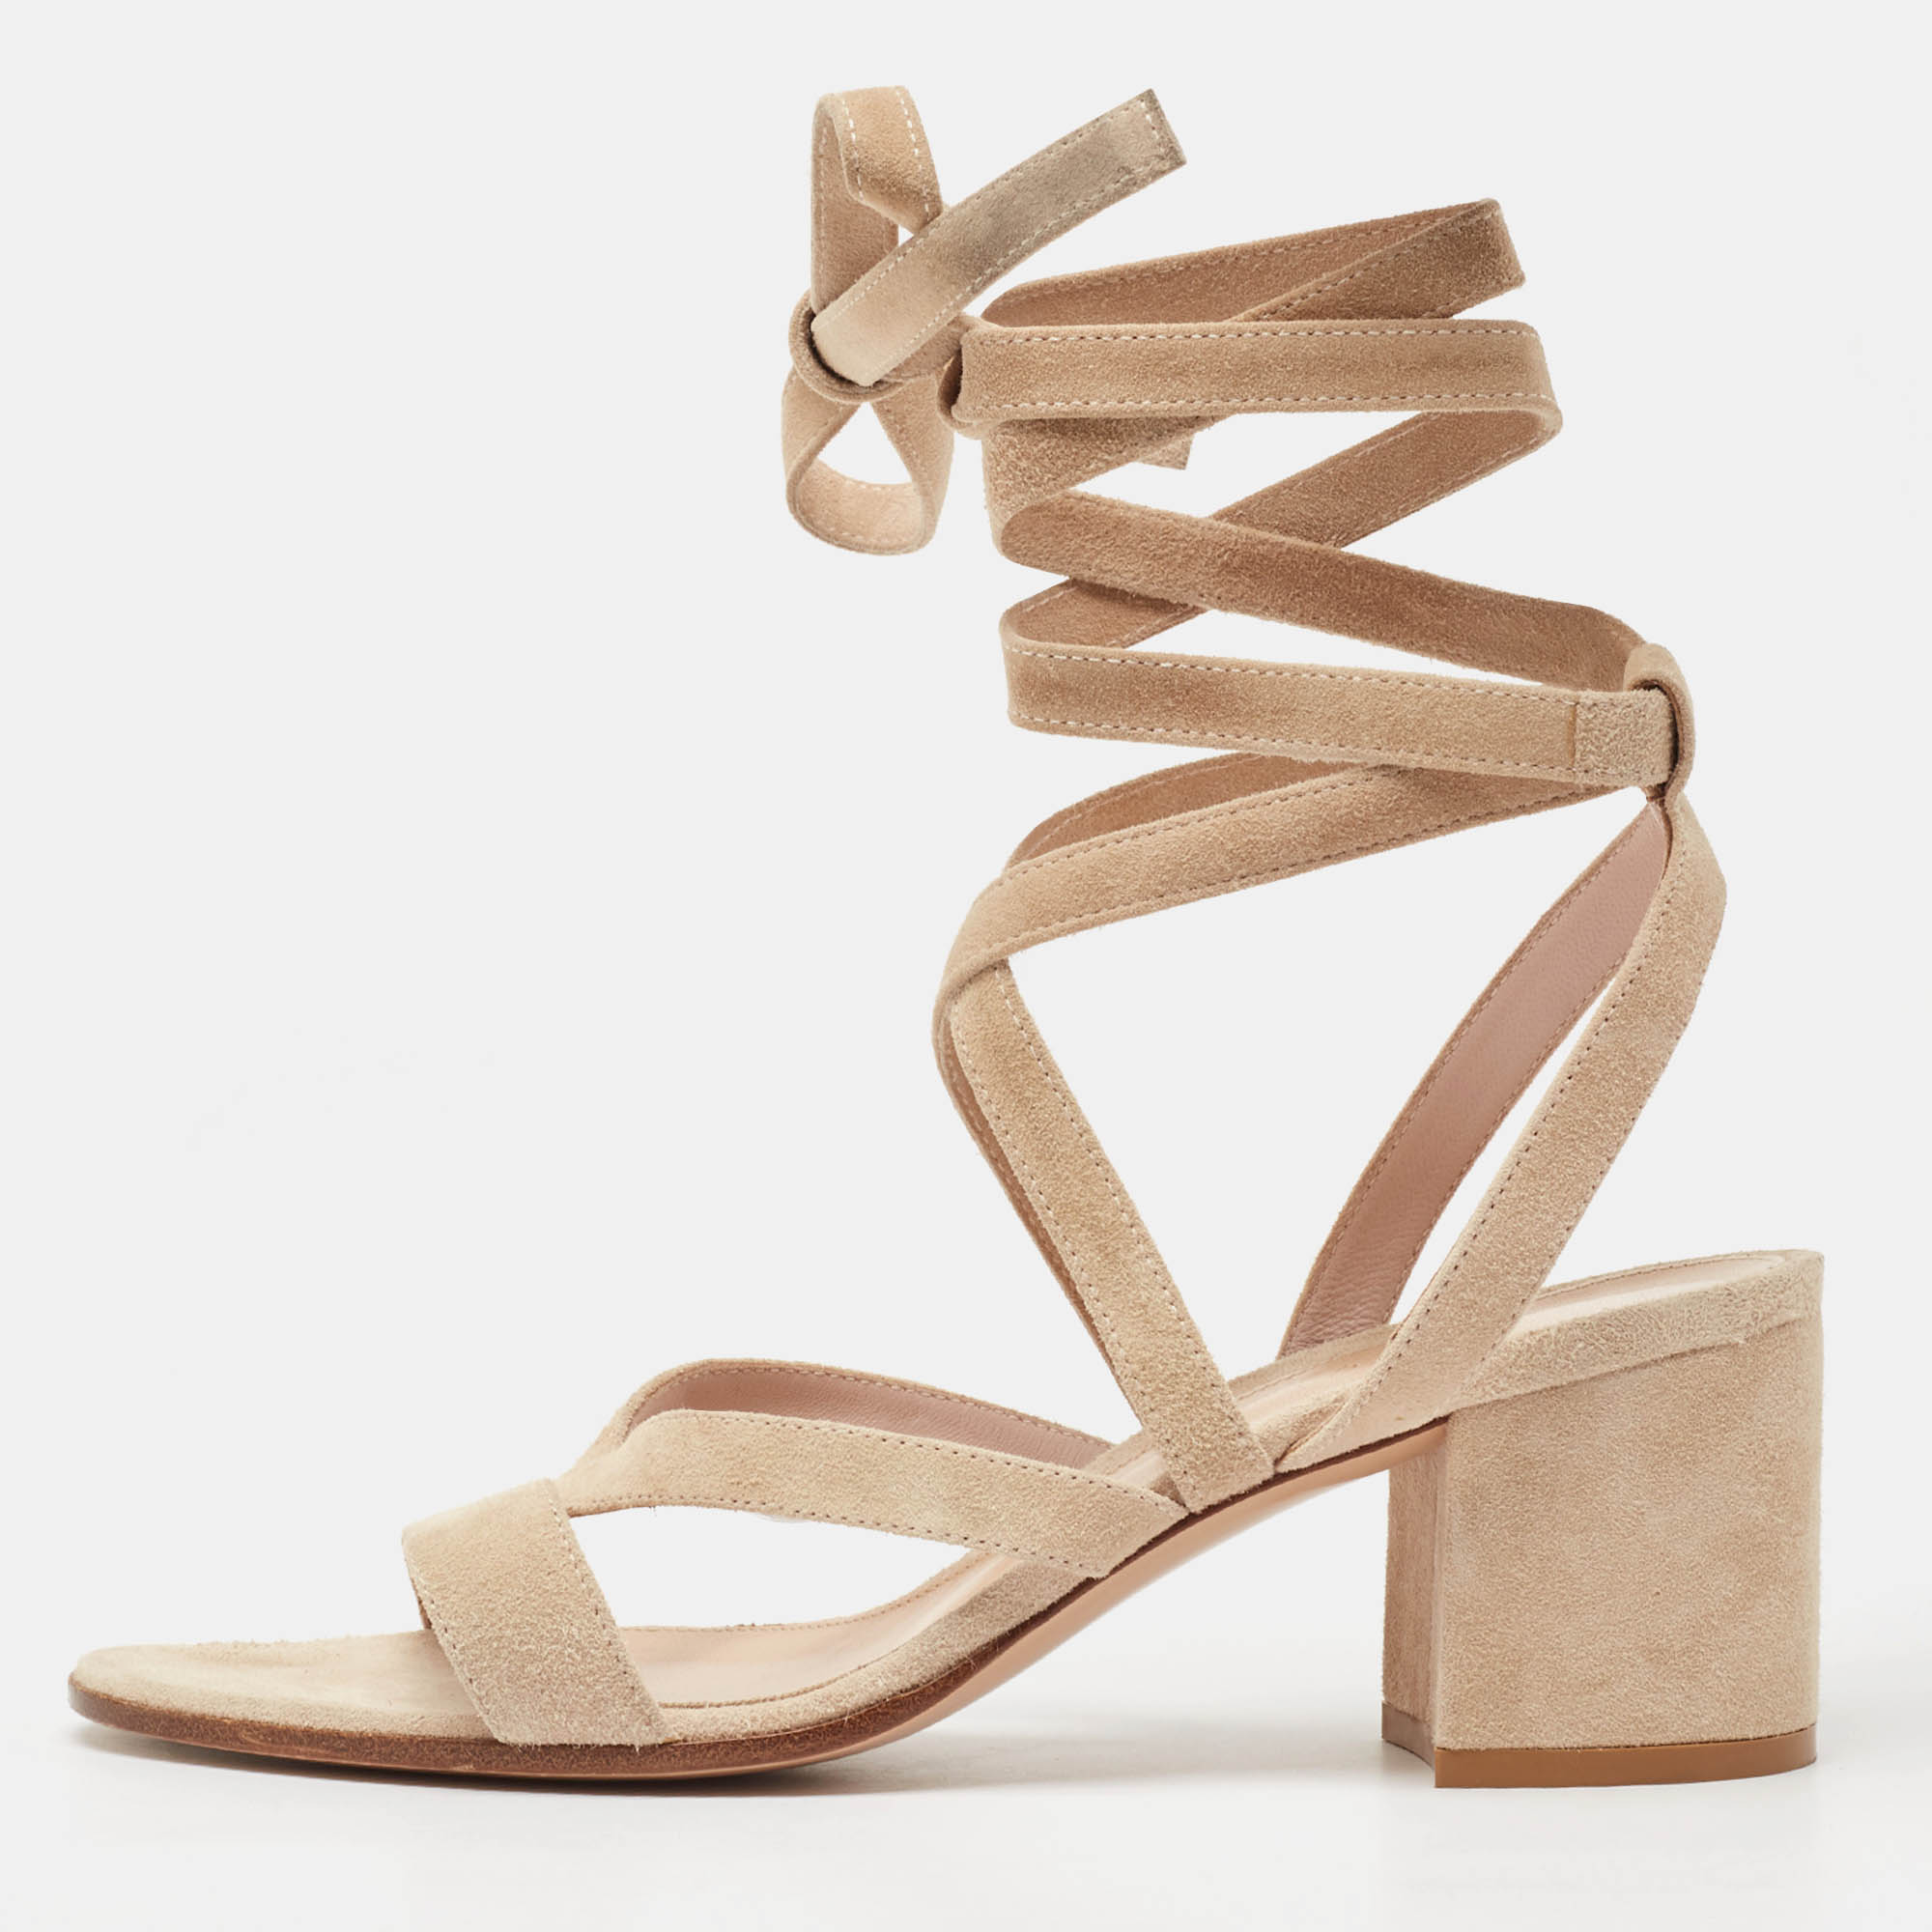 Gianvito rossi beige suede janis ankle wrap sandals size 37.5